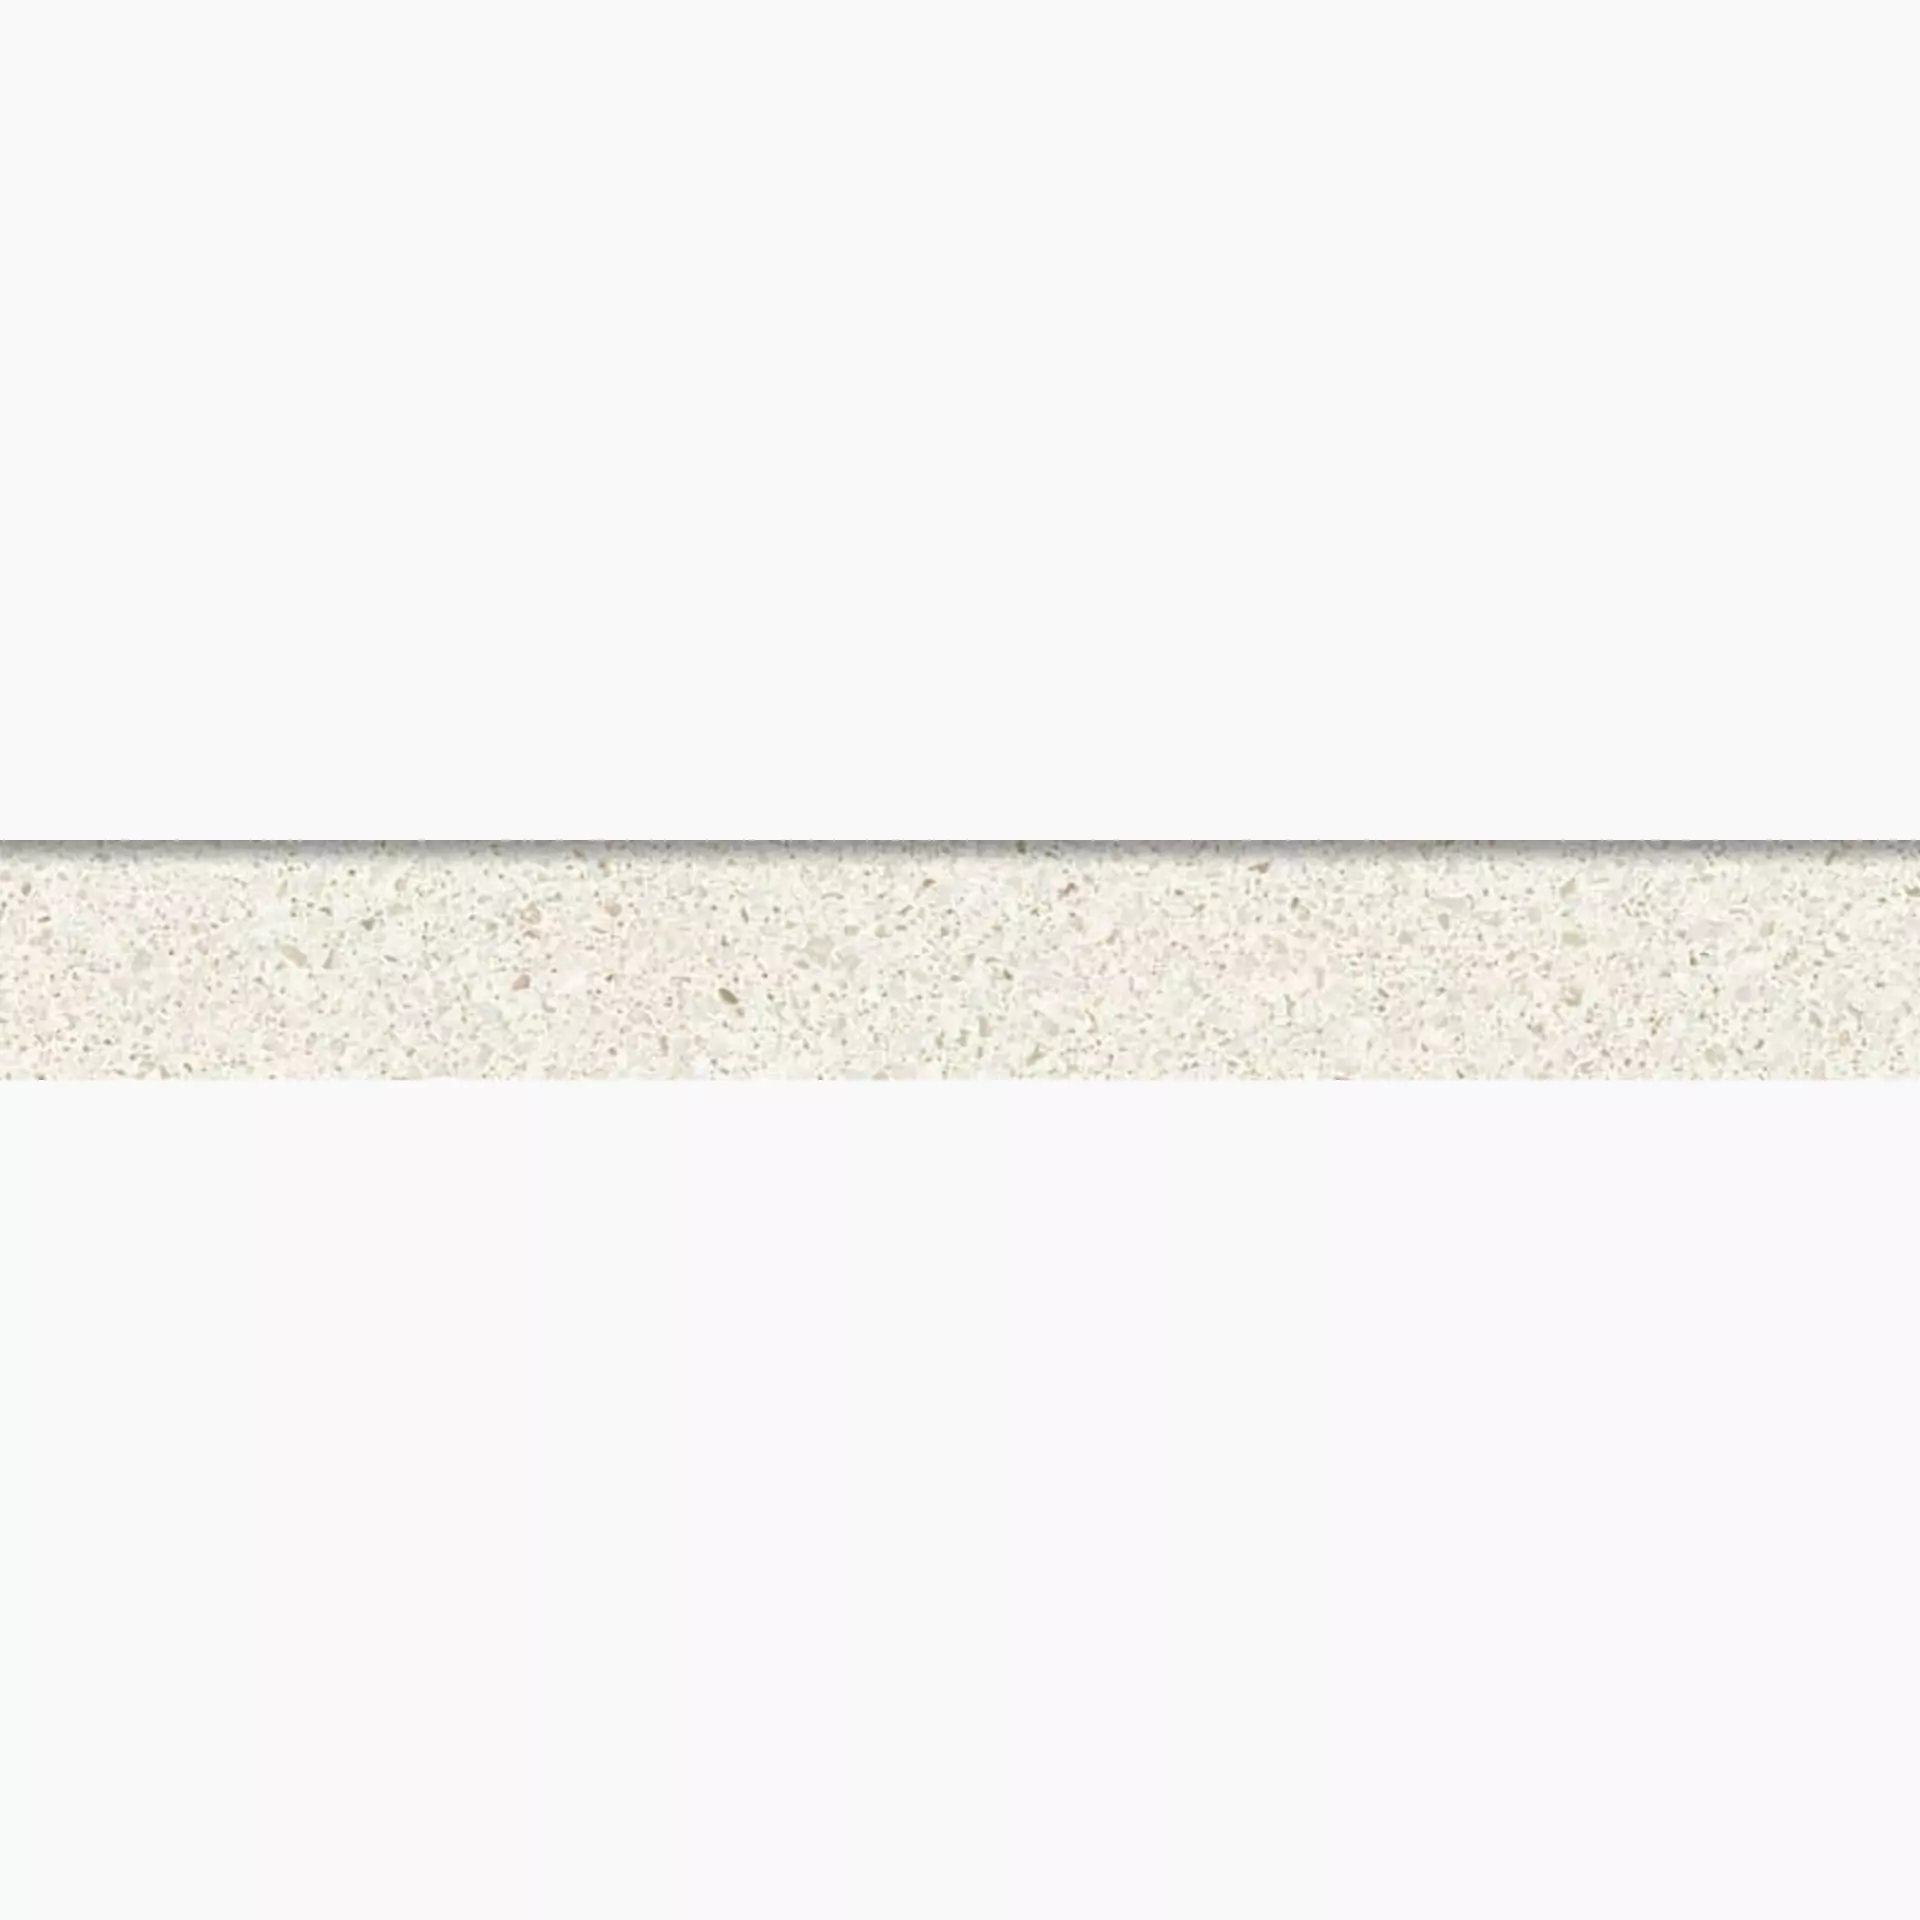 Sant Agostino Newdeco' Light Natural Skirting board CSABNDLN60 7,3x60cm rectified 10mm